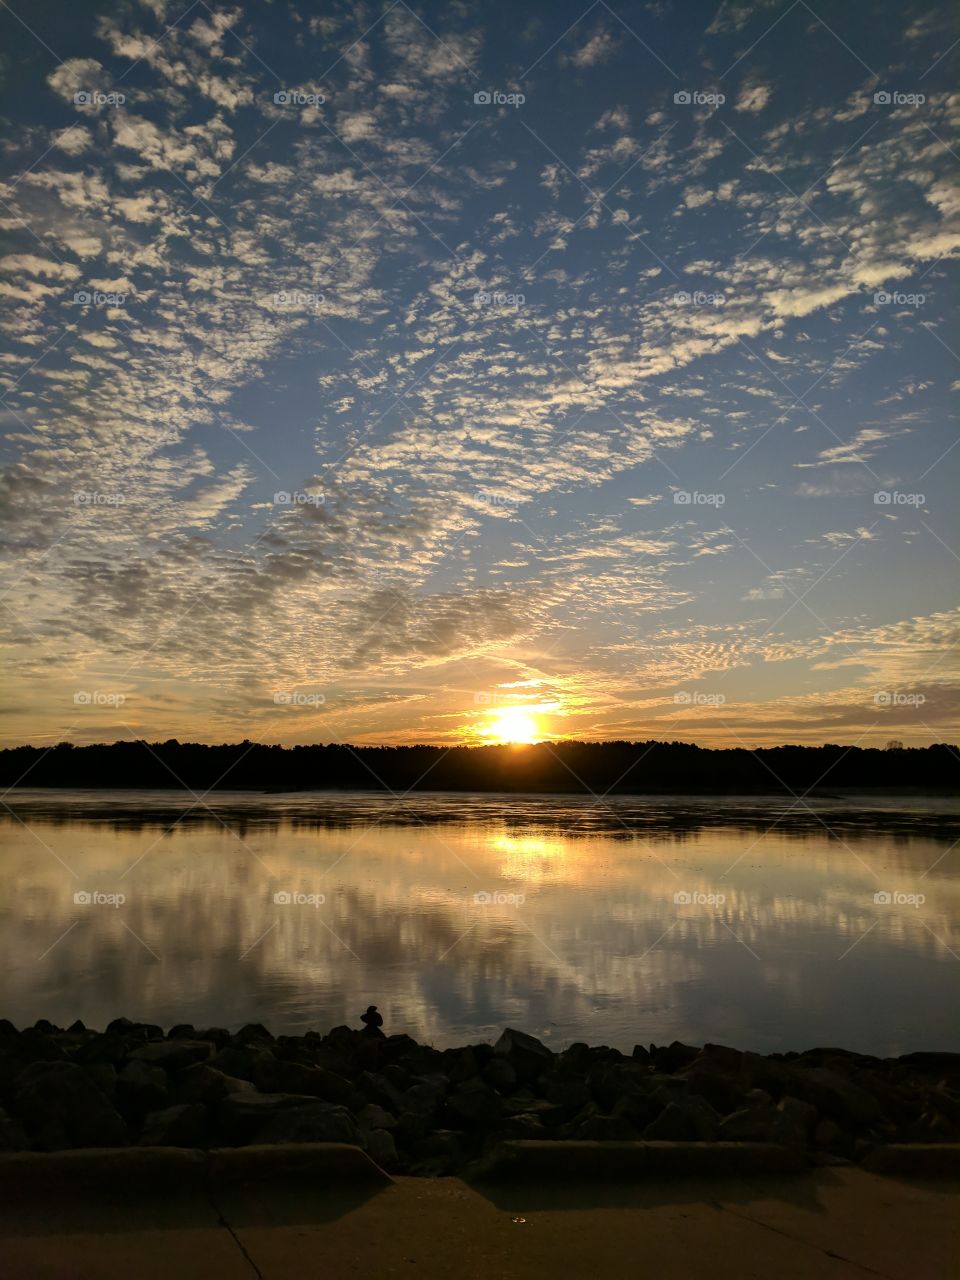 Sunrise and clouds over the Mississippi River